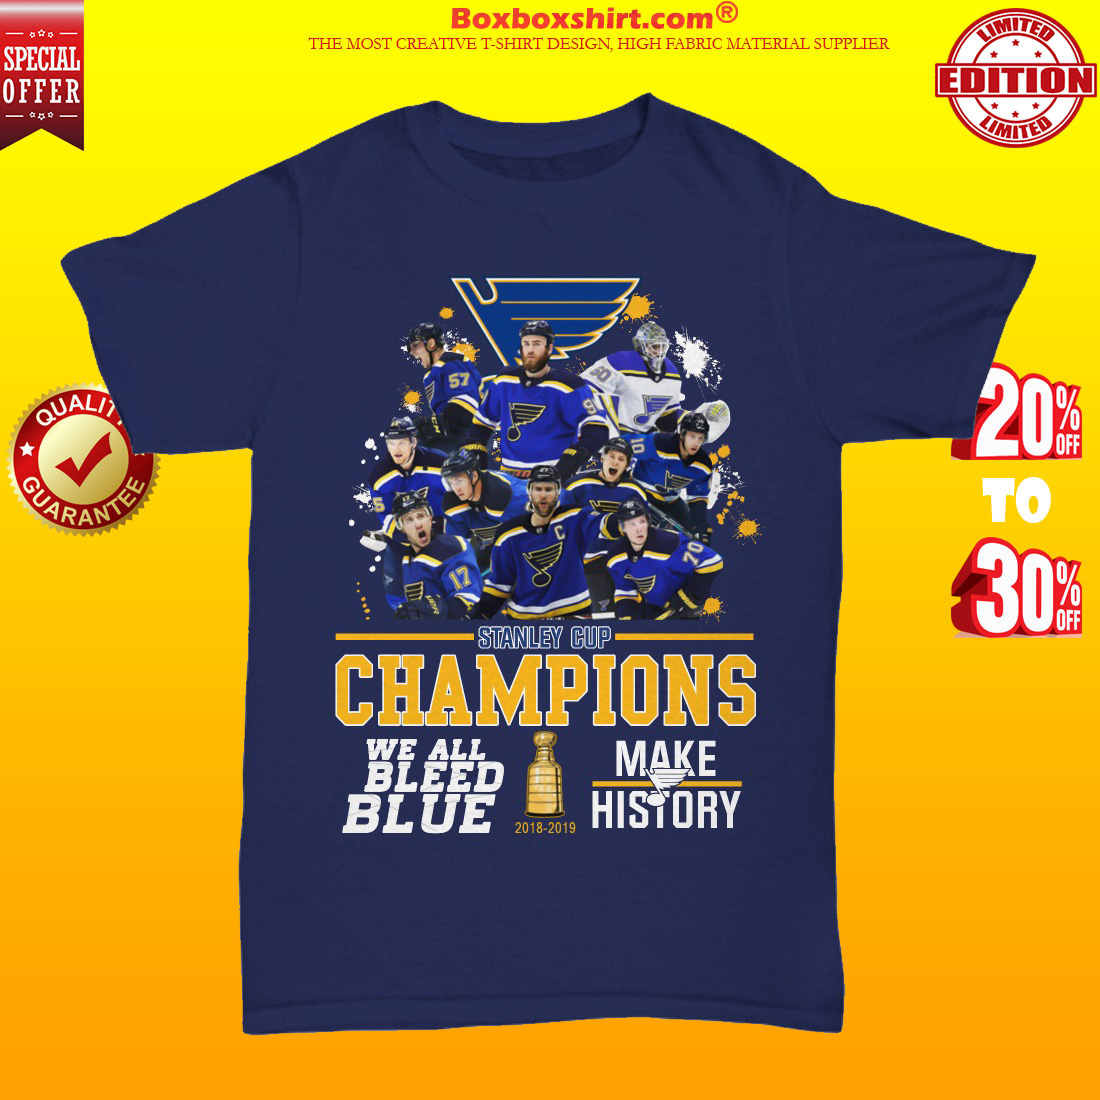 [NEWEST] Stanley cup champions we all bleed blue make history shirt